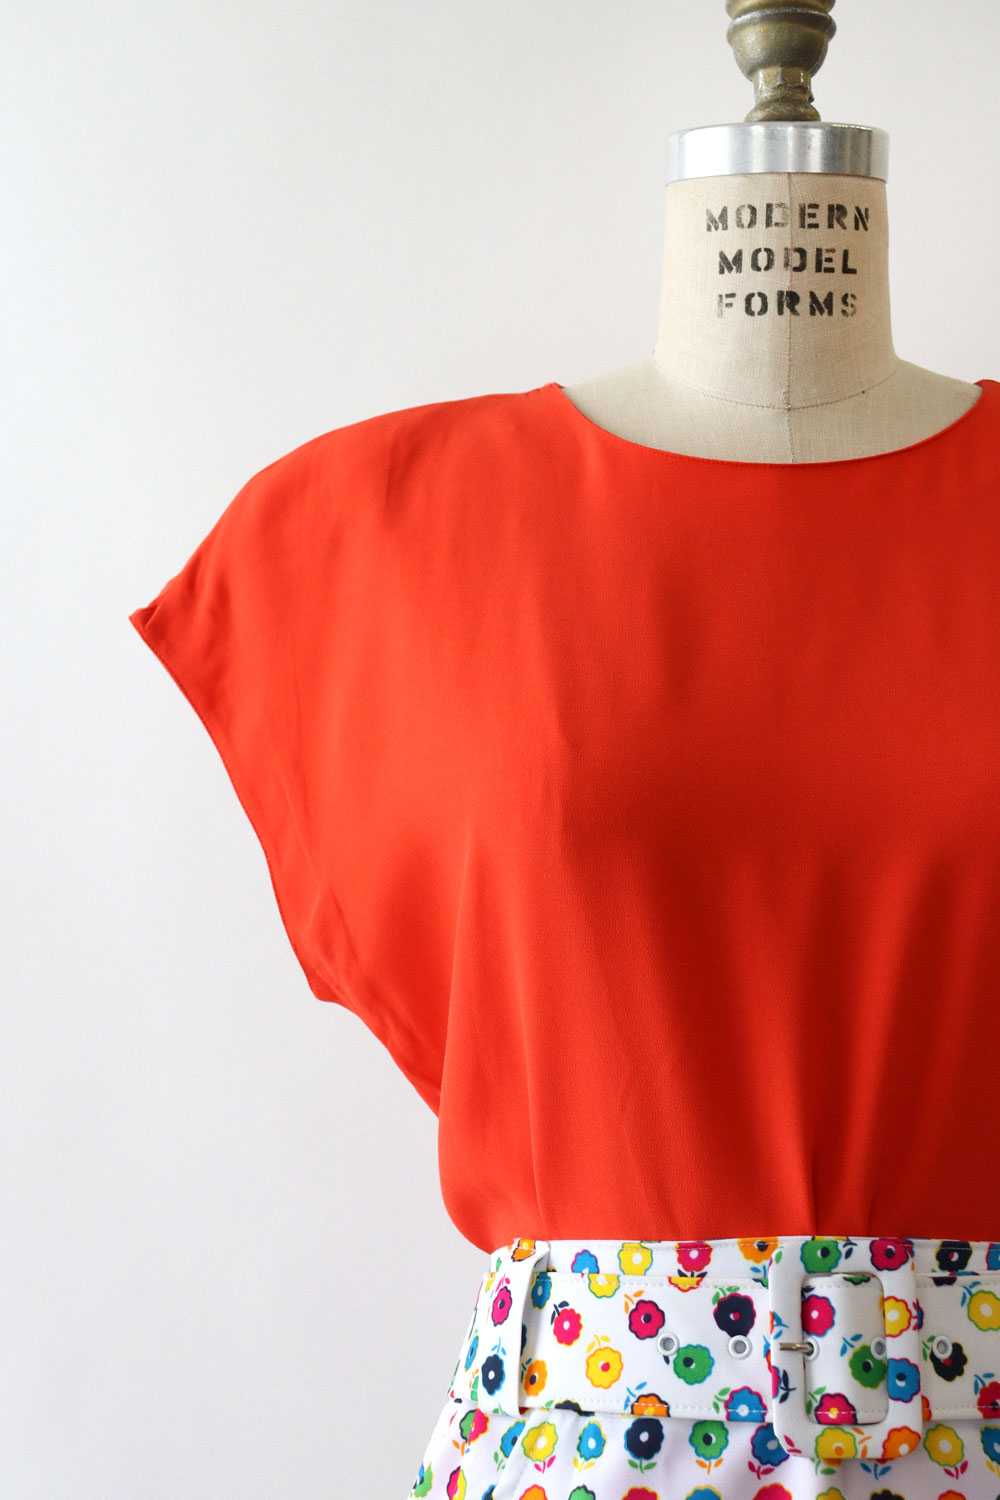 Tomato Red Silky Rayon Top M/L - image 3